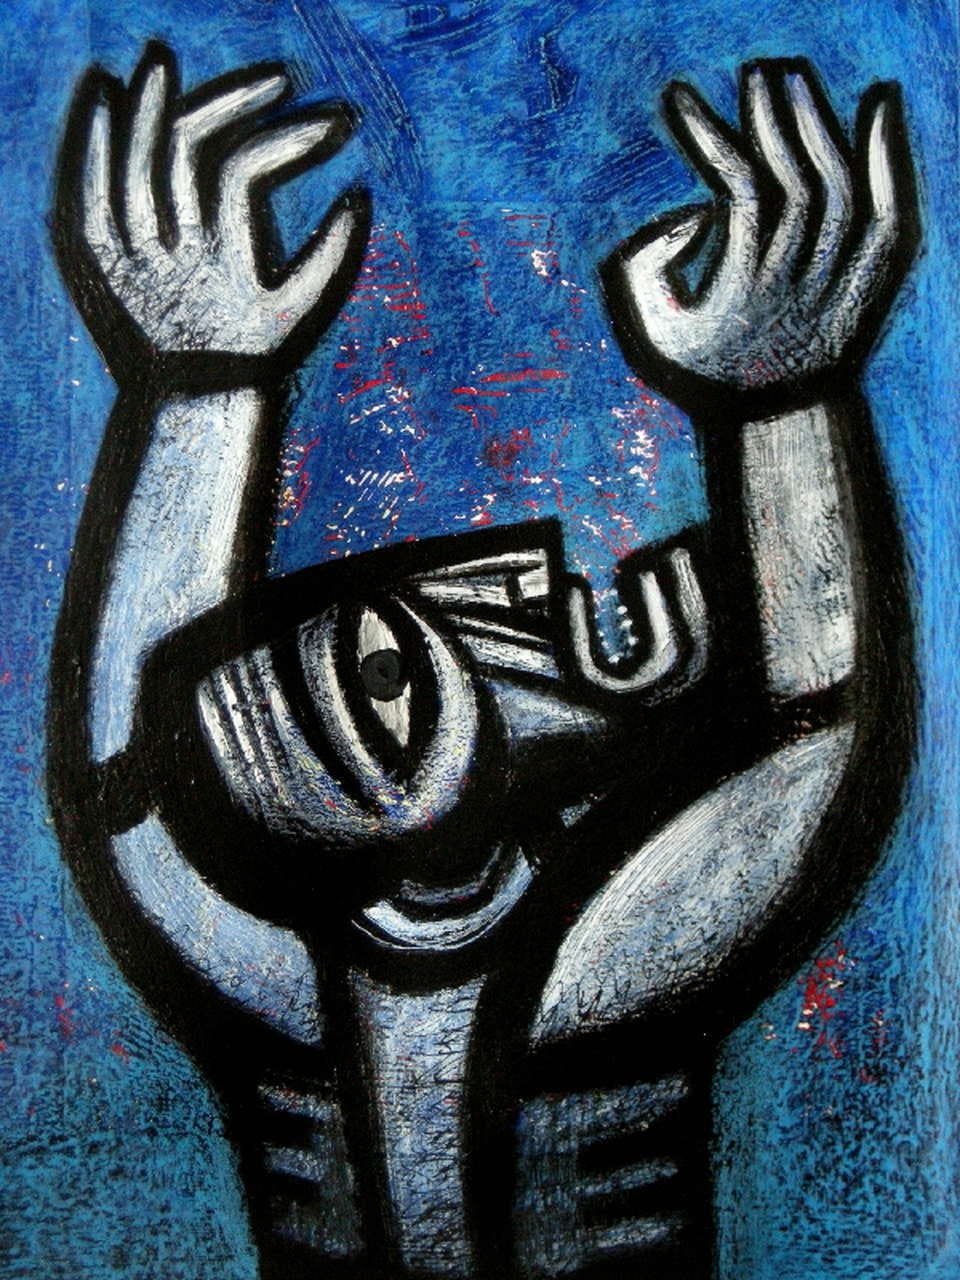 Painting in a contemporary style showing a figure with grayish skin on a deep blue background lifting his arms to the sky. His face is bent upward, one big eye visible to the viewer open wide and his mouth open in pain or a shout.